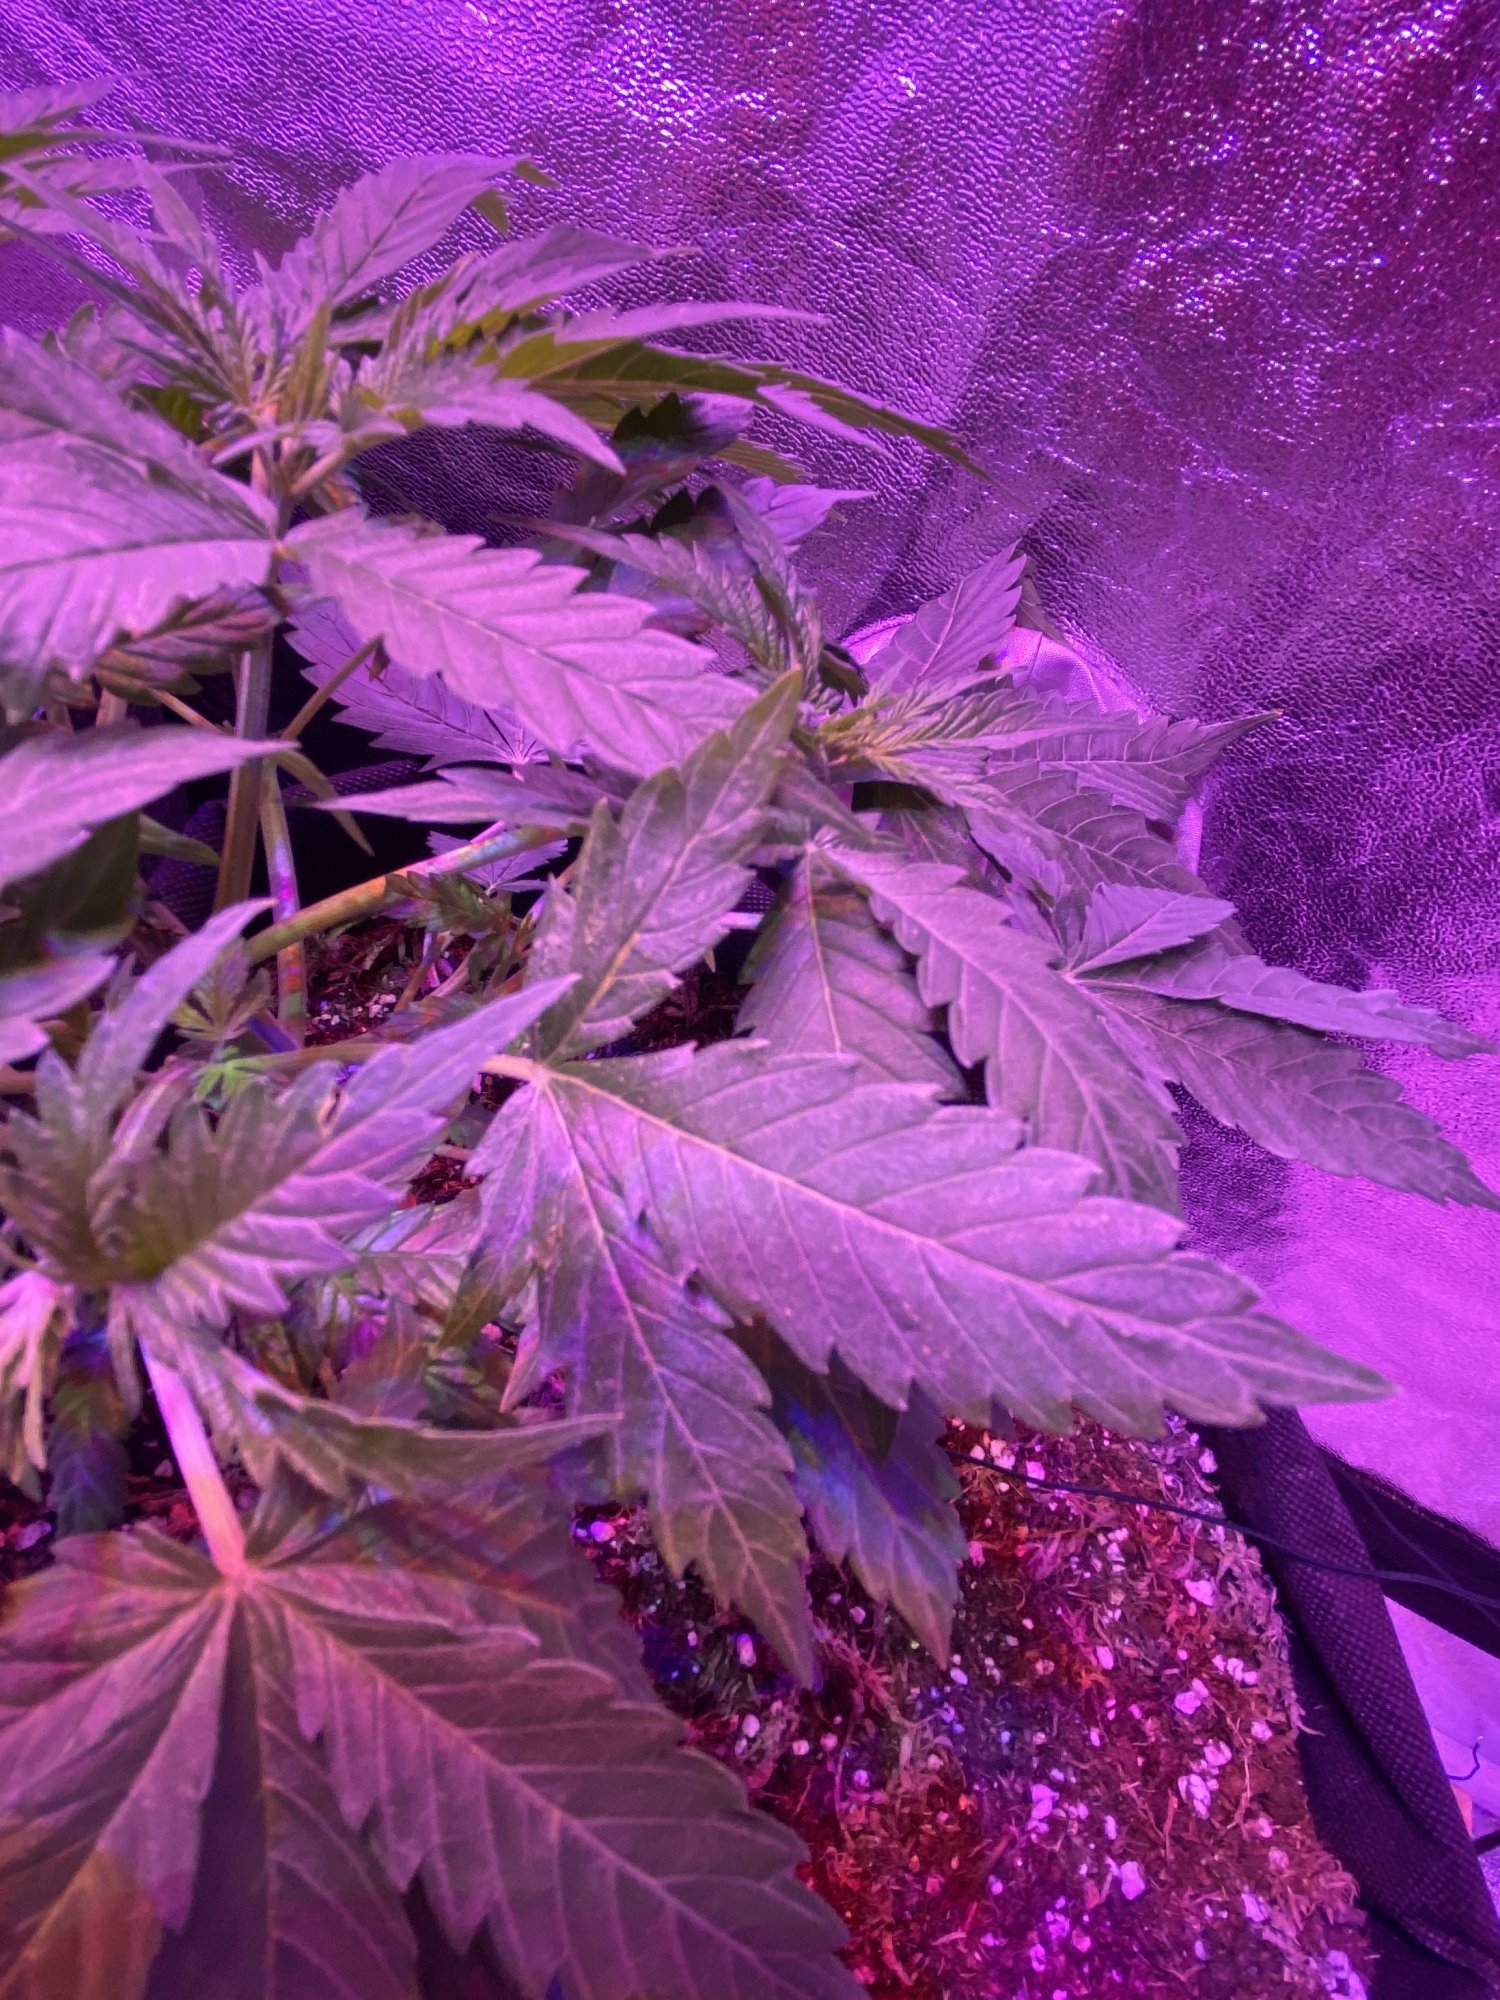 Help problem with my leaves cant figure out